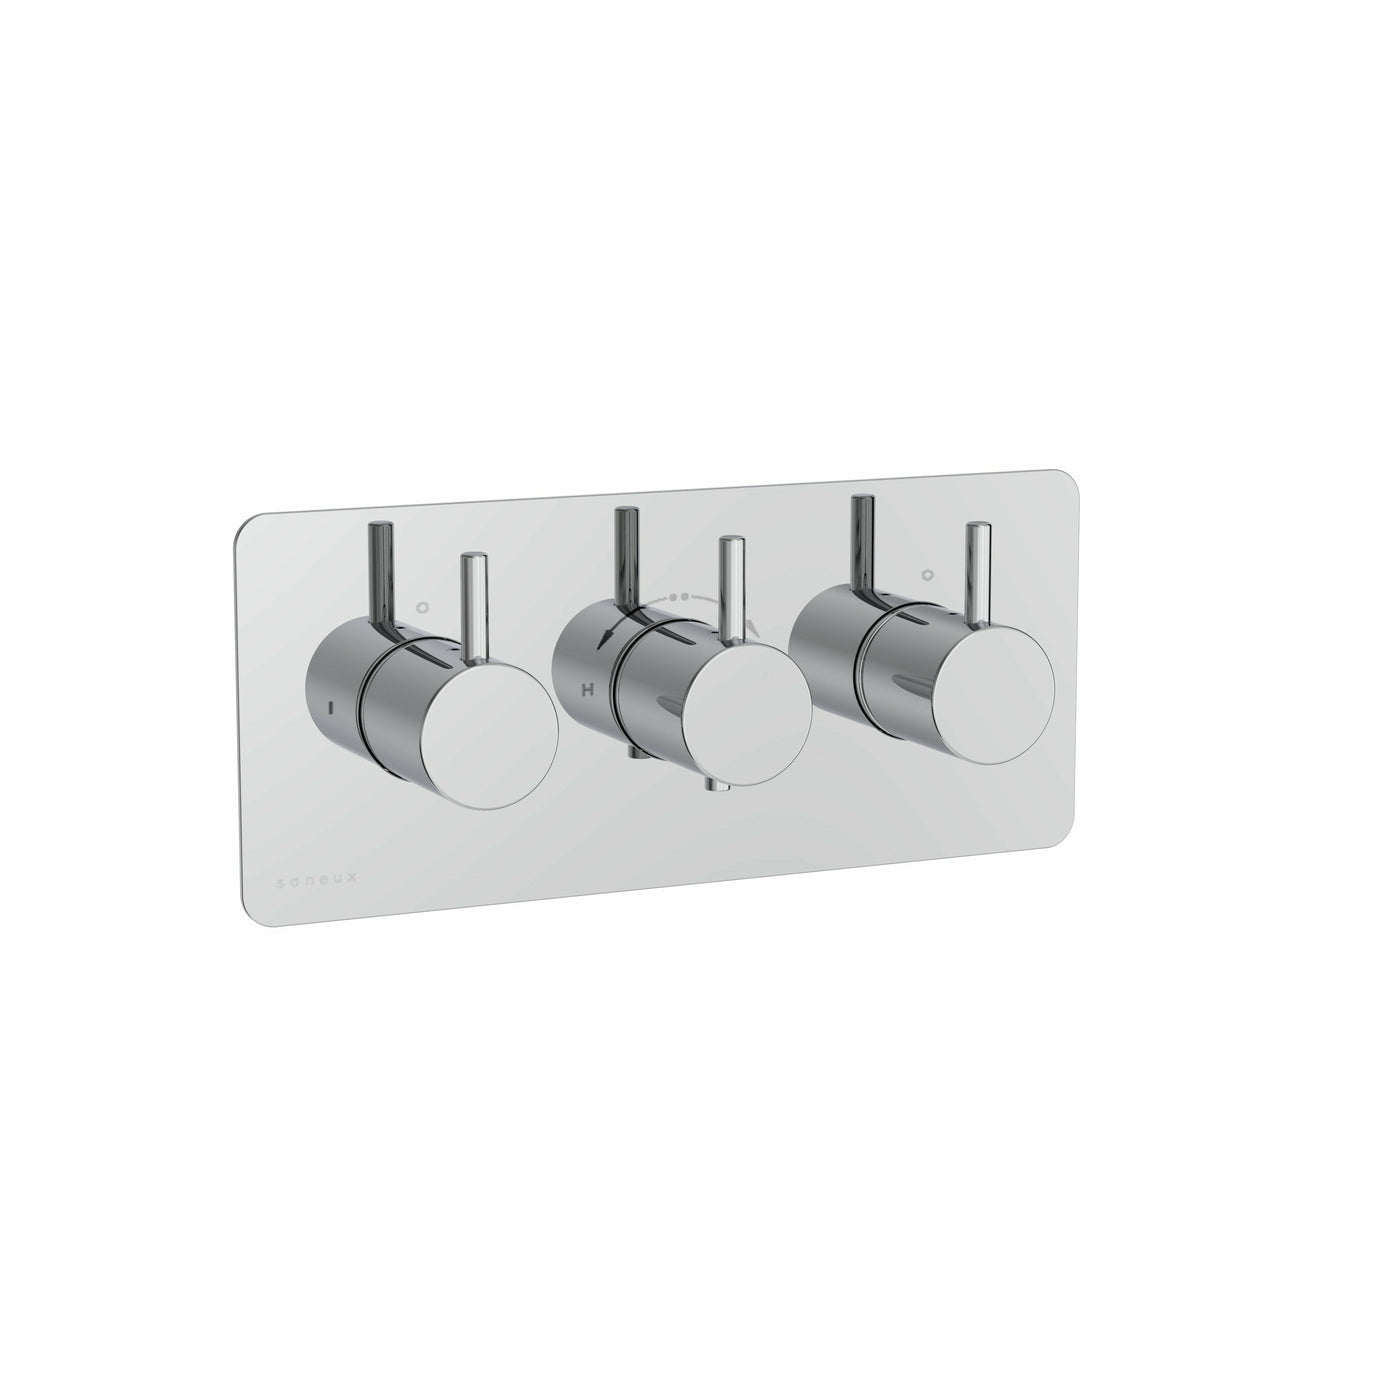 Saneux Chrome 3 hole - 3 Outlets thermostatic valve handle with plate, Round Landscape - Letta London - Thermostatic Showers